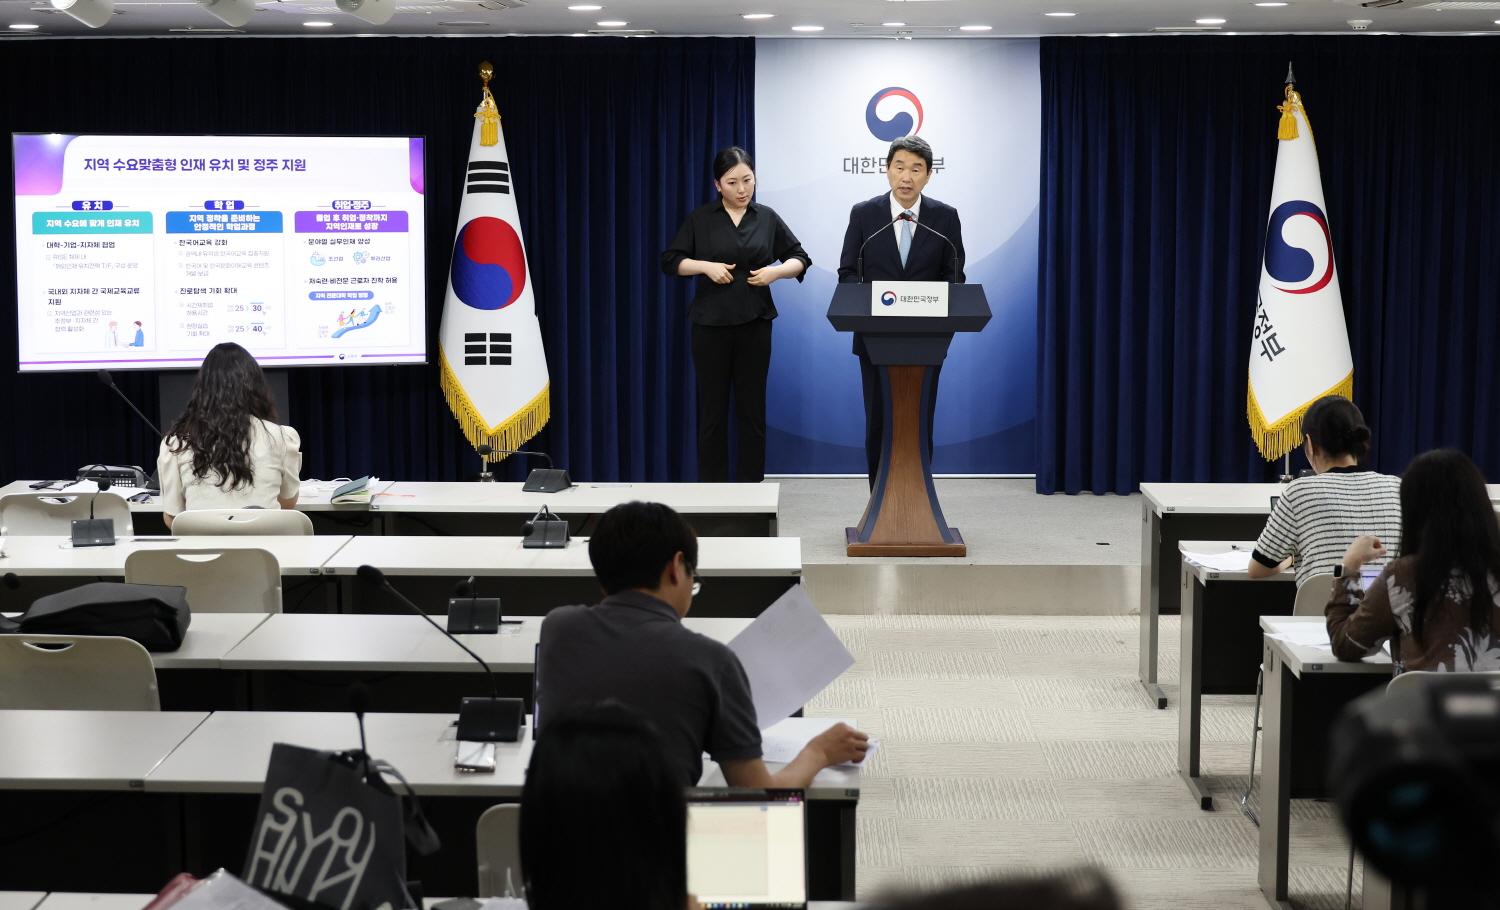 Ministry of Education Announces Study Korea 300K Project (7)